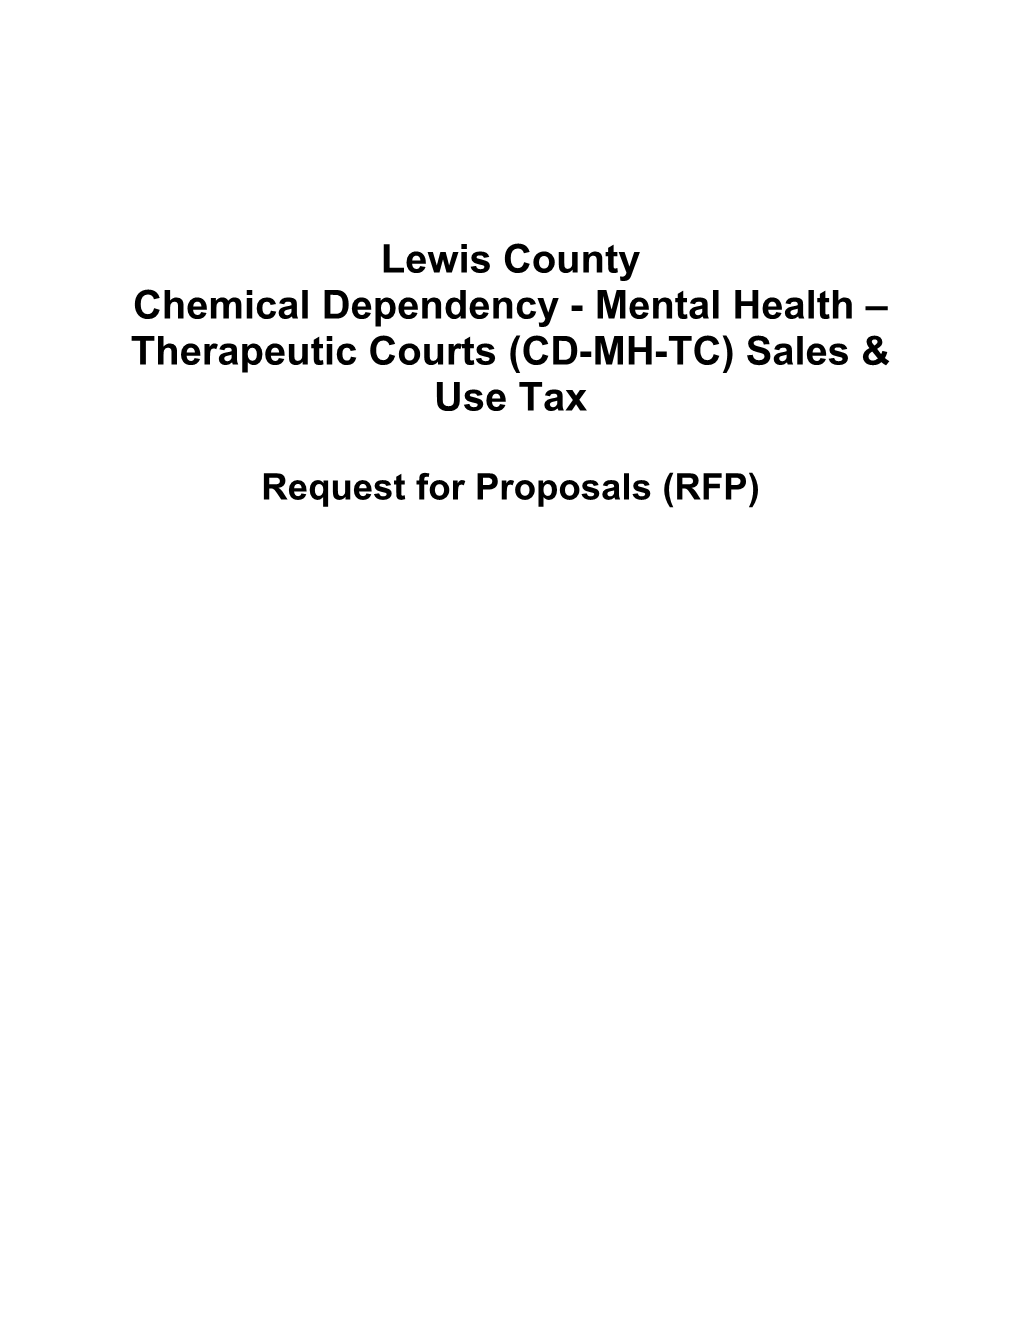 Lewis County Chemical Dependency - Mental Health Therapeutic Courts(CD-MH-TC) Sales & Use